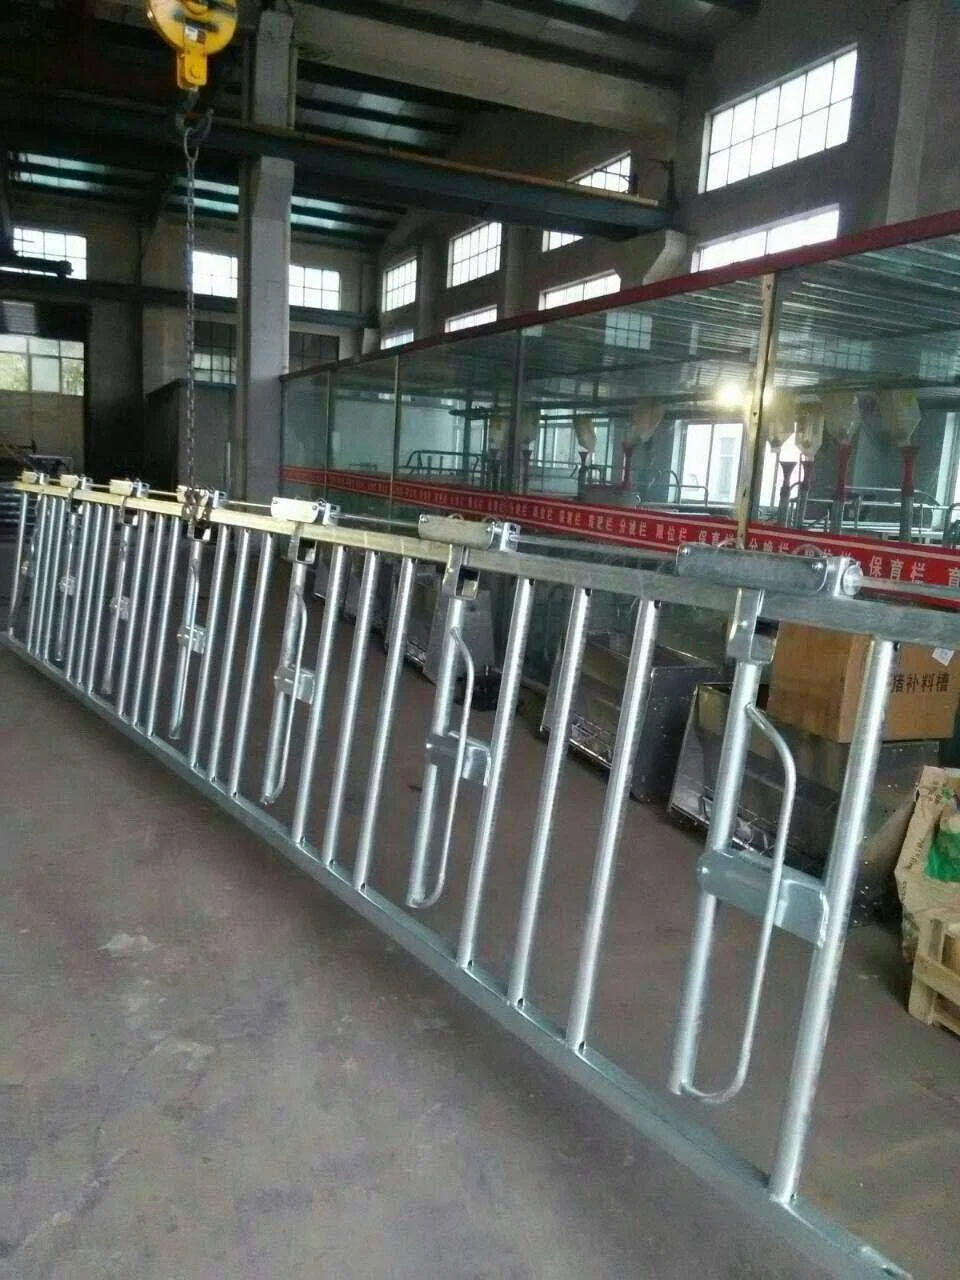 Poulry Machinery Manufacture Hot DIP Cheap Cattle Farm Quality Cow Headlock